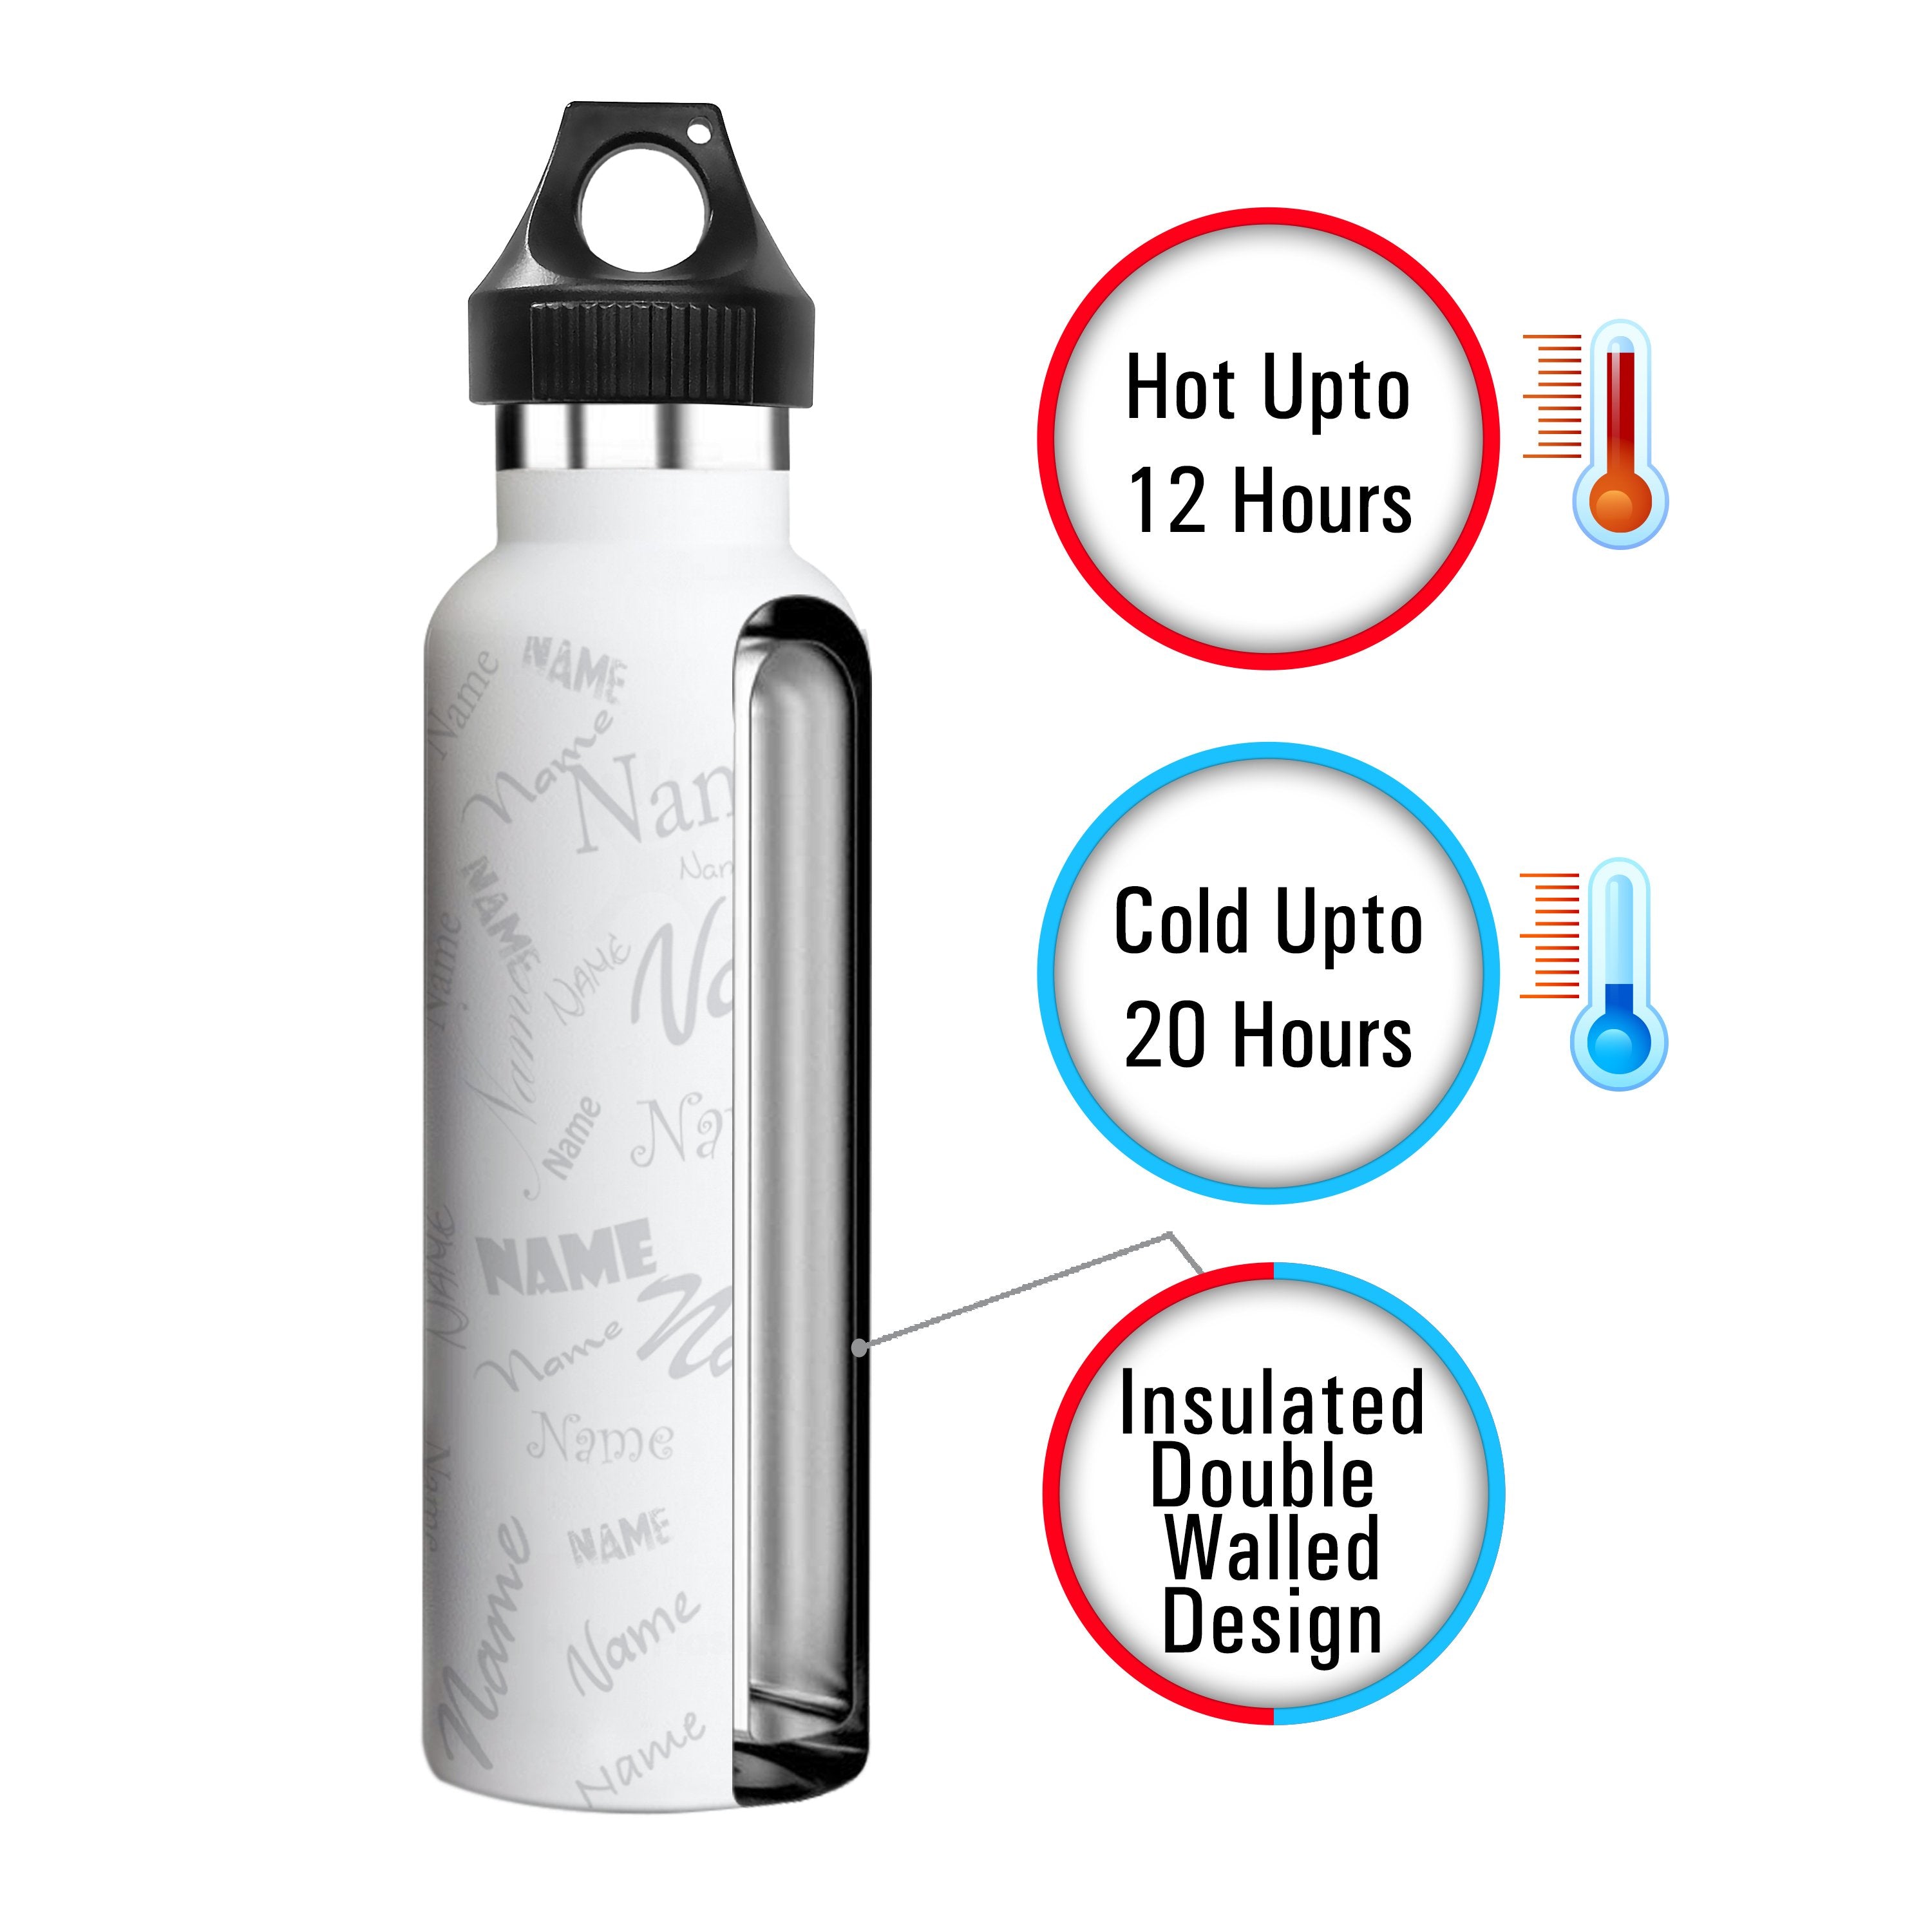 Me insulated graffiti bottle personalized stainless steel name water bottle2